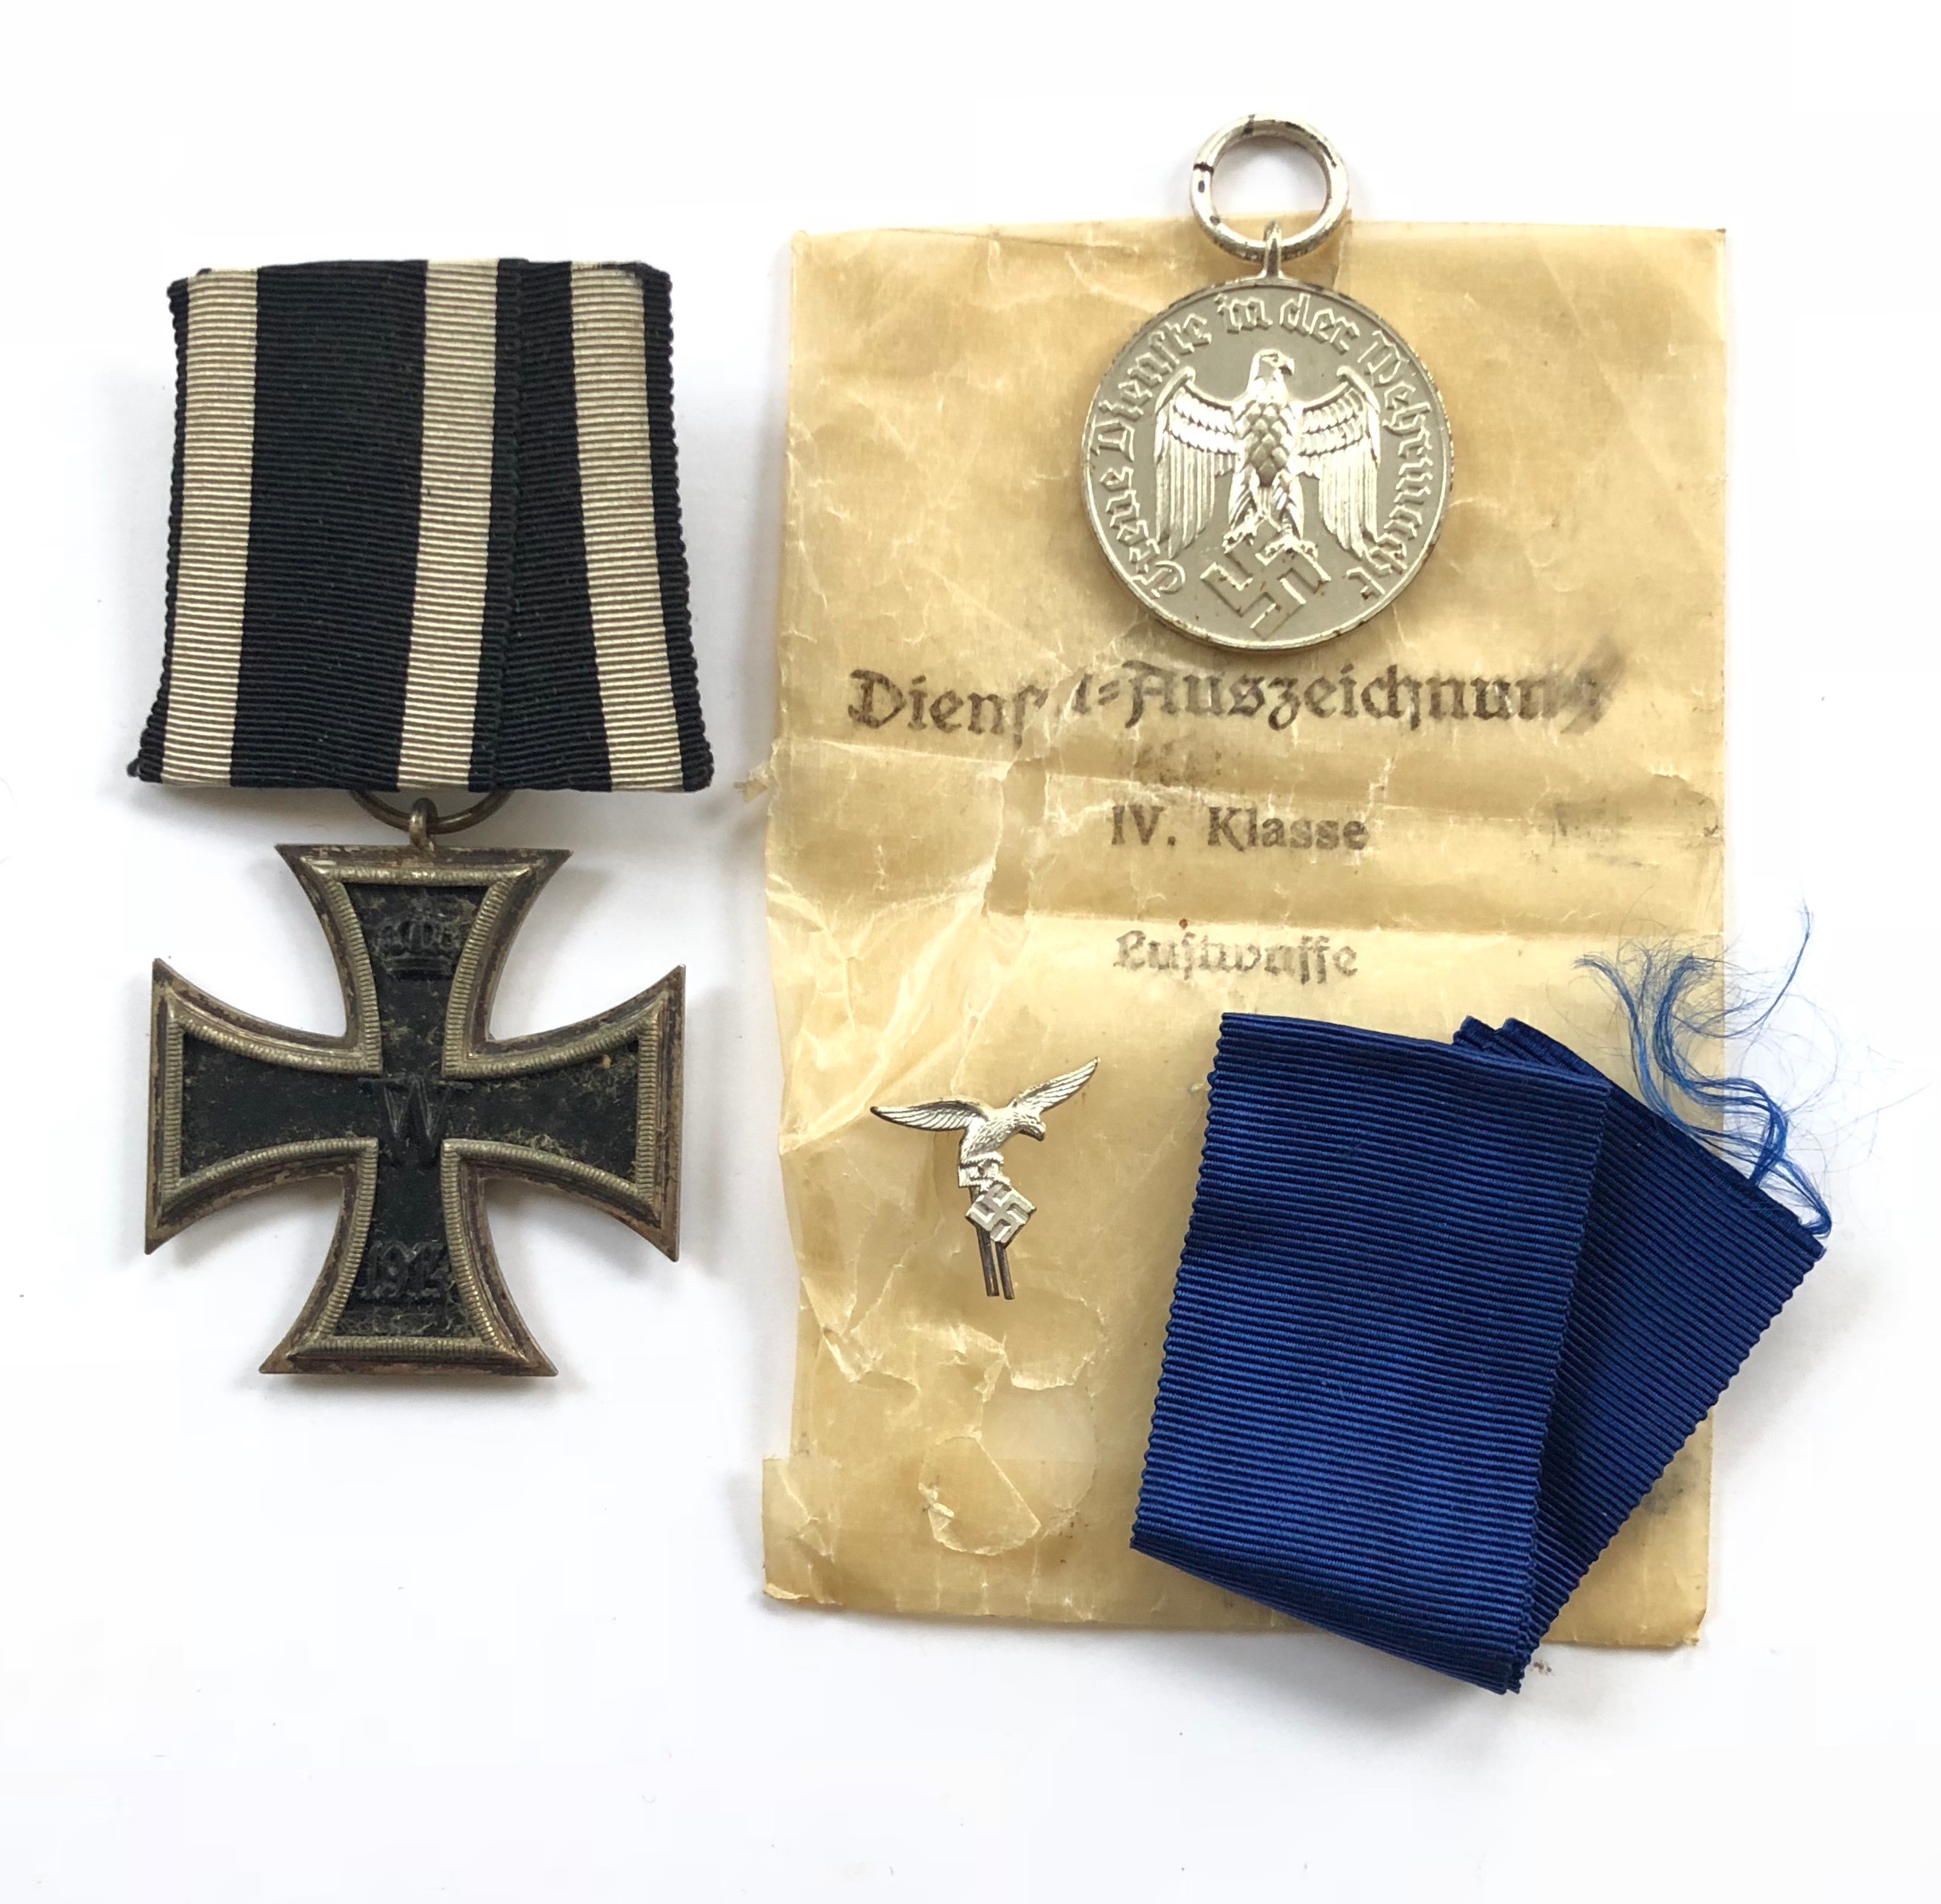 German Third Reich Luftwaffe 4 year Service Medal in packet and an Iron Cross 1914, 2nd Class.